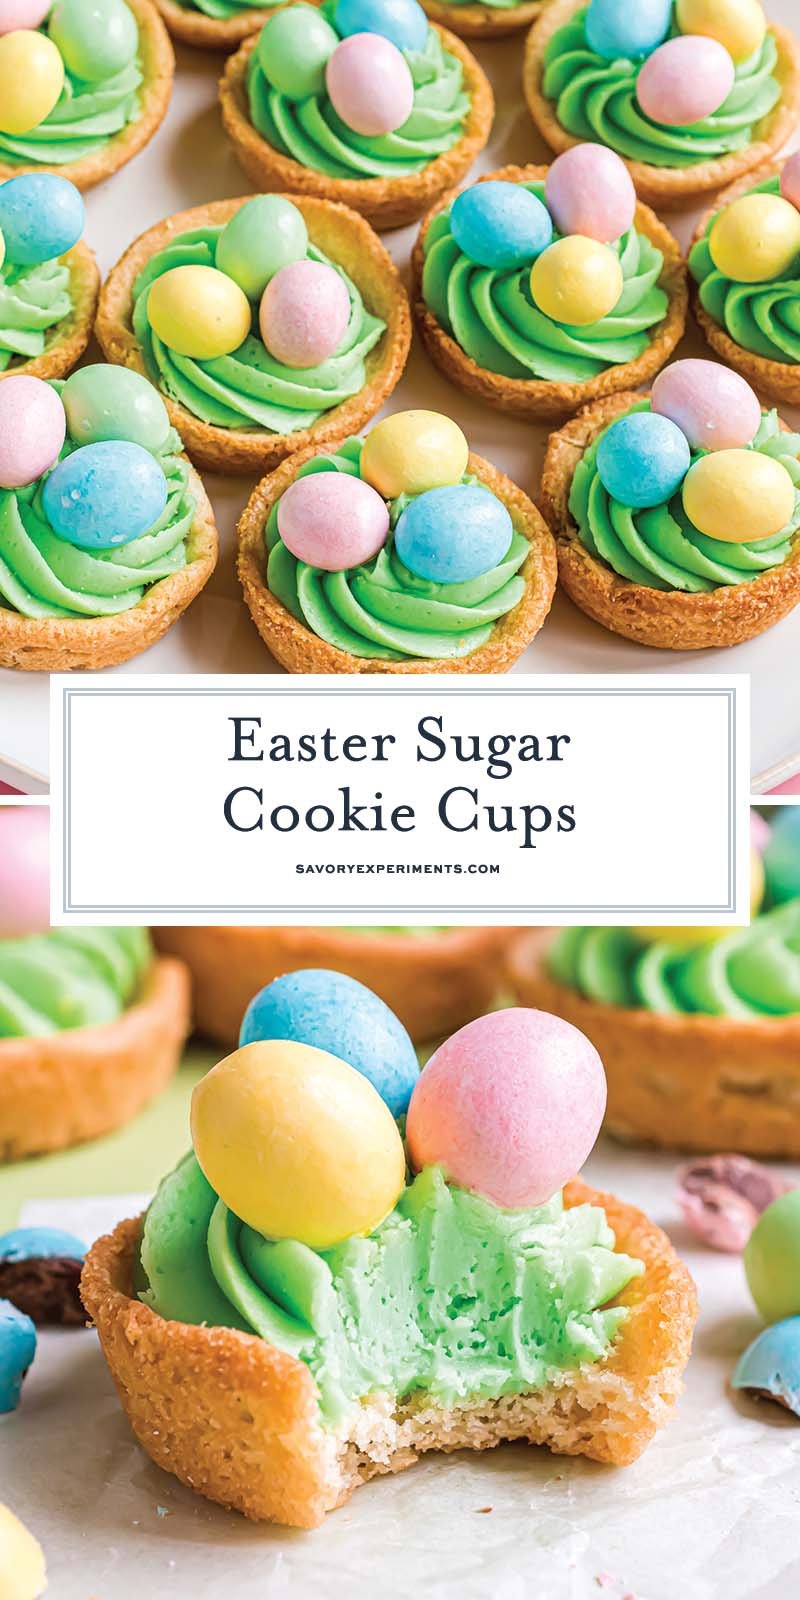 collage of easter sugar cookies cups for pinterest